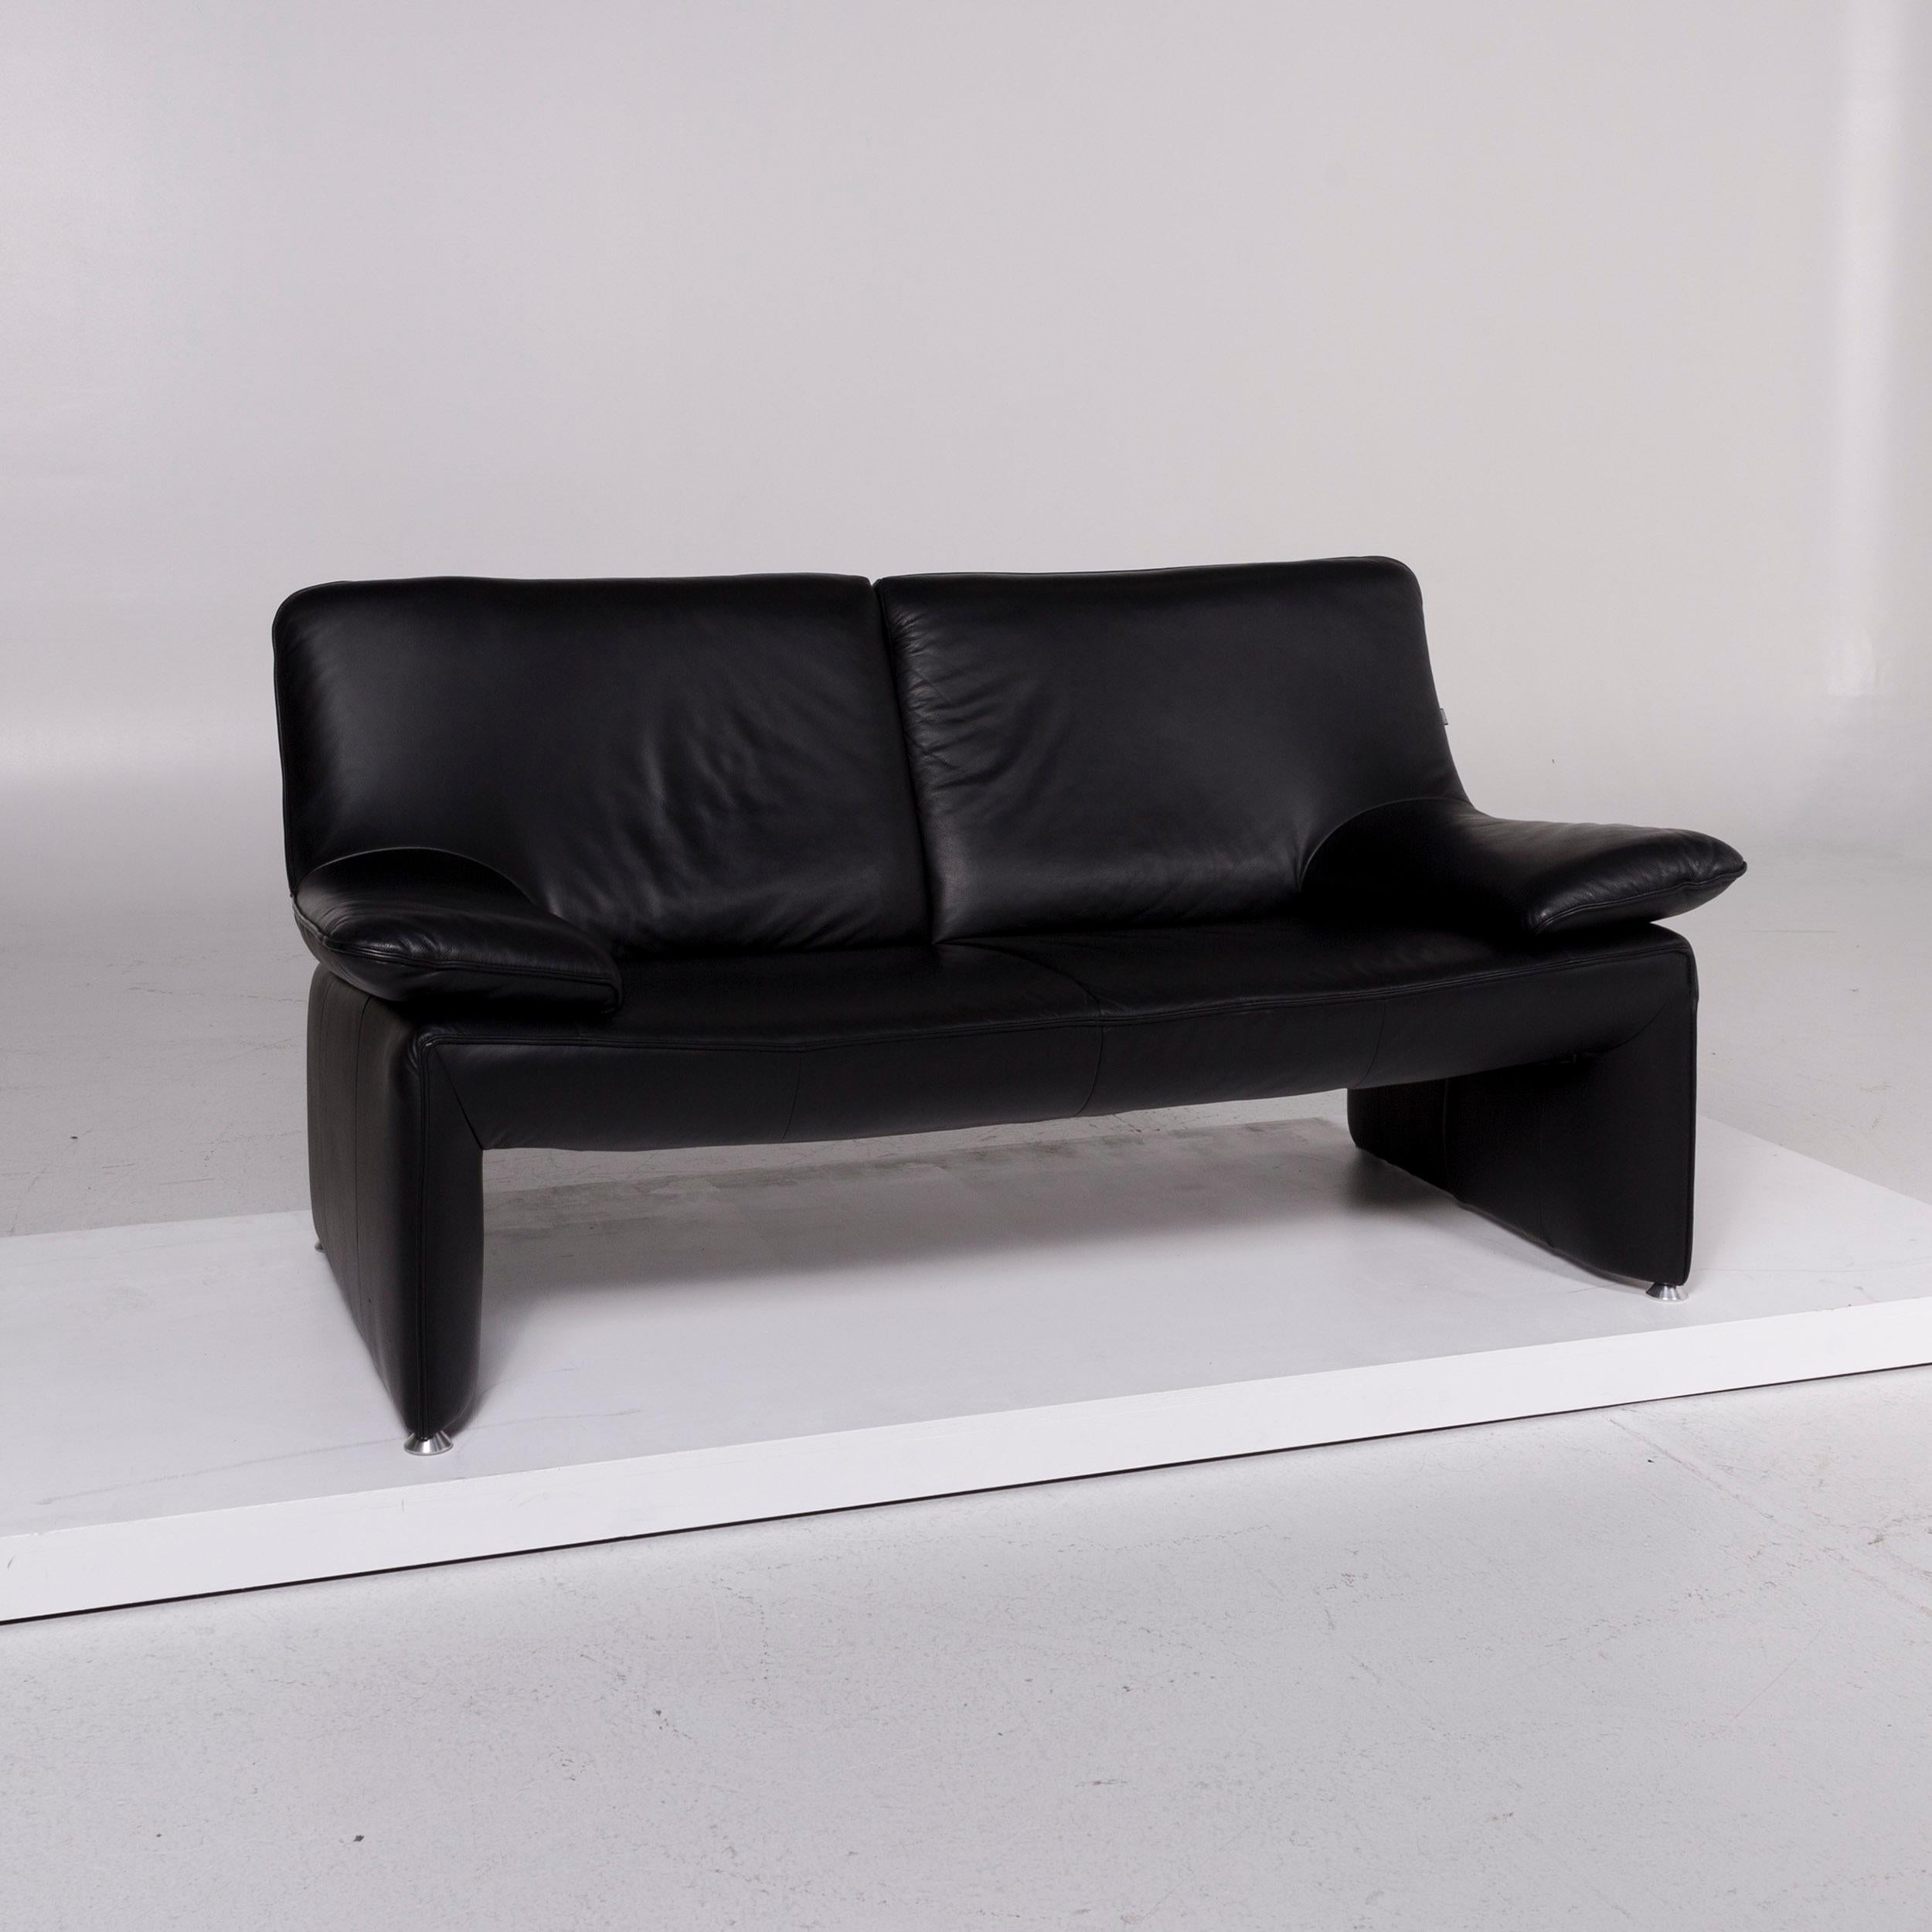 We bring to you a Laauser leather sofa black two-seat couch.
 

 Product measurements in centimeters:
 

Depth 84
Width 163
Height 83
Seat-height 42
Rest-height 52
Seat-depth 55
Seat-width 105
Back-height 44.
 